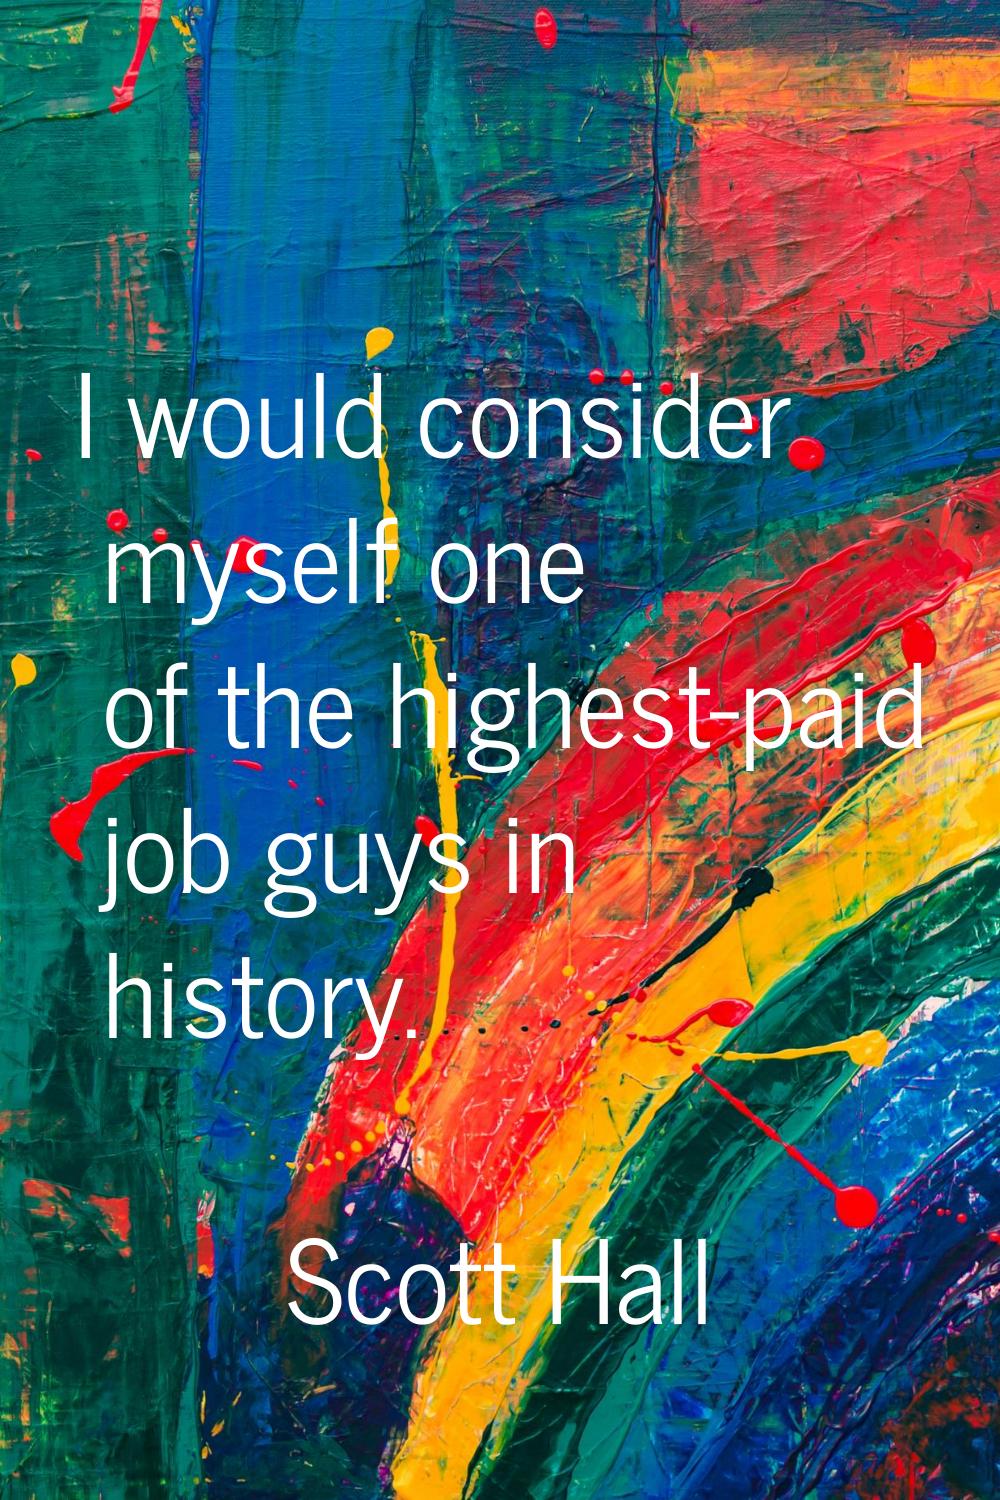 I would consider myself one of the highest-paid job guys in history.